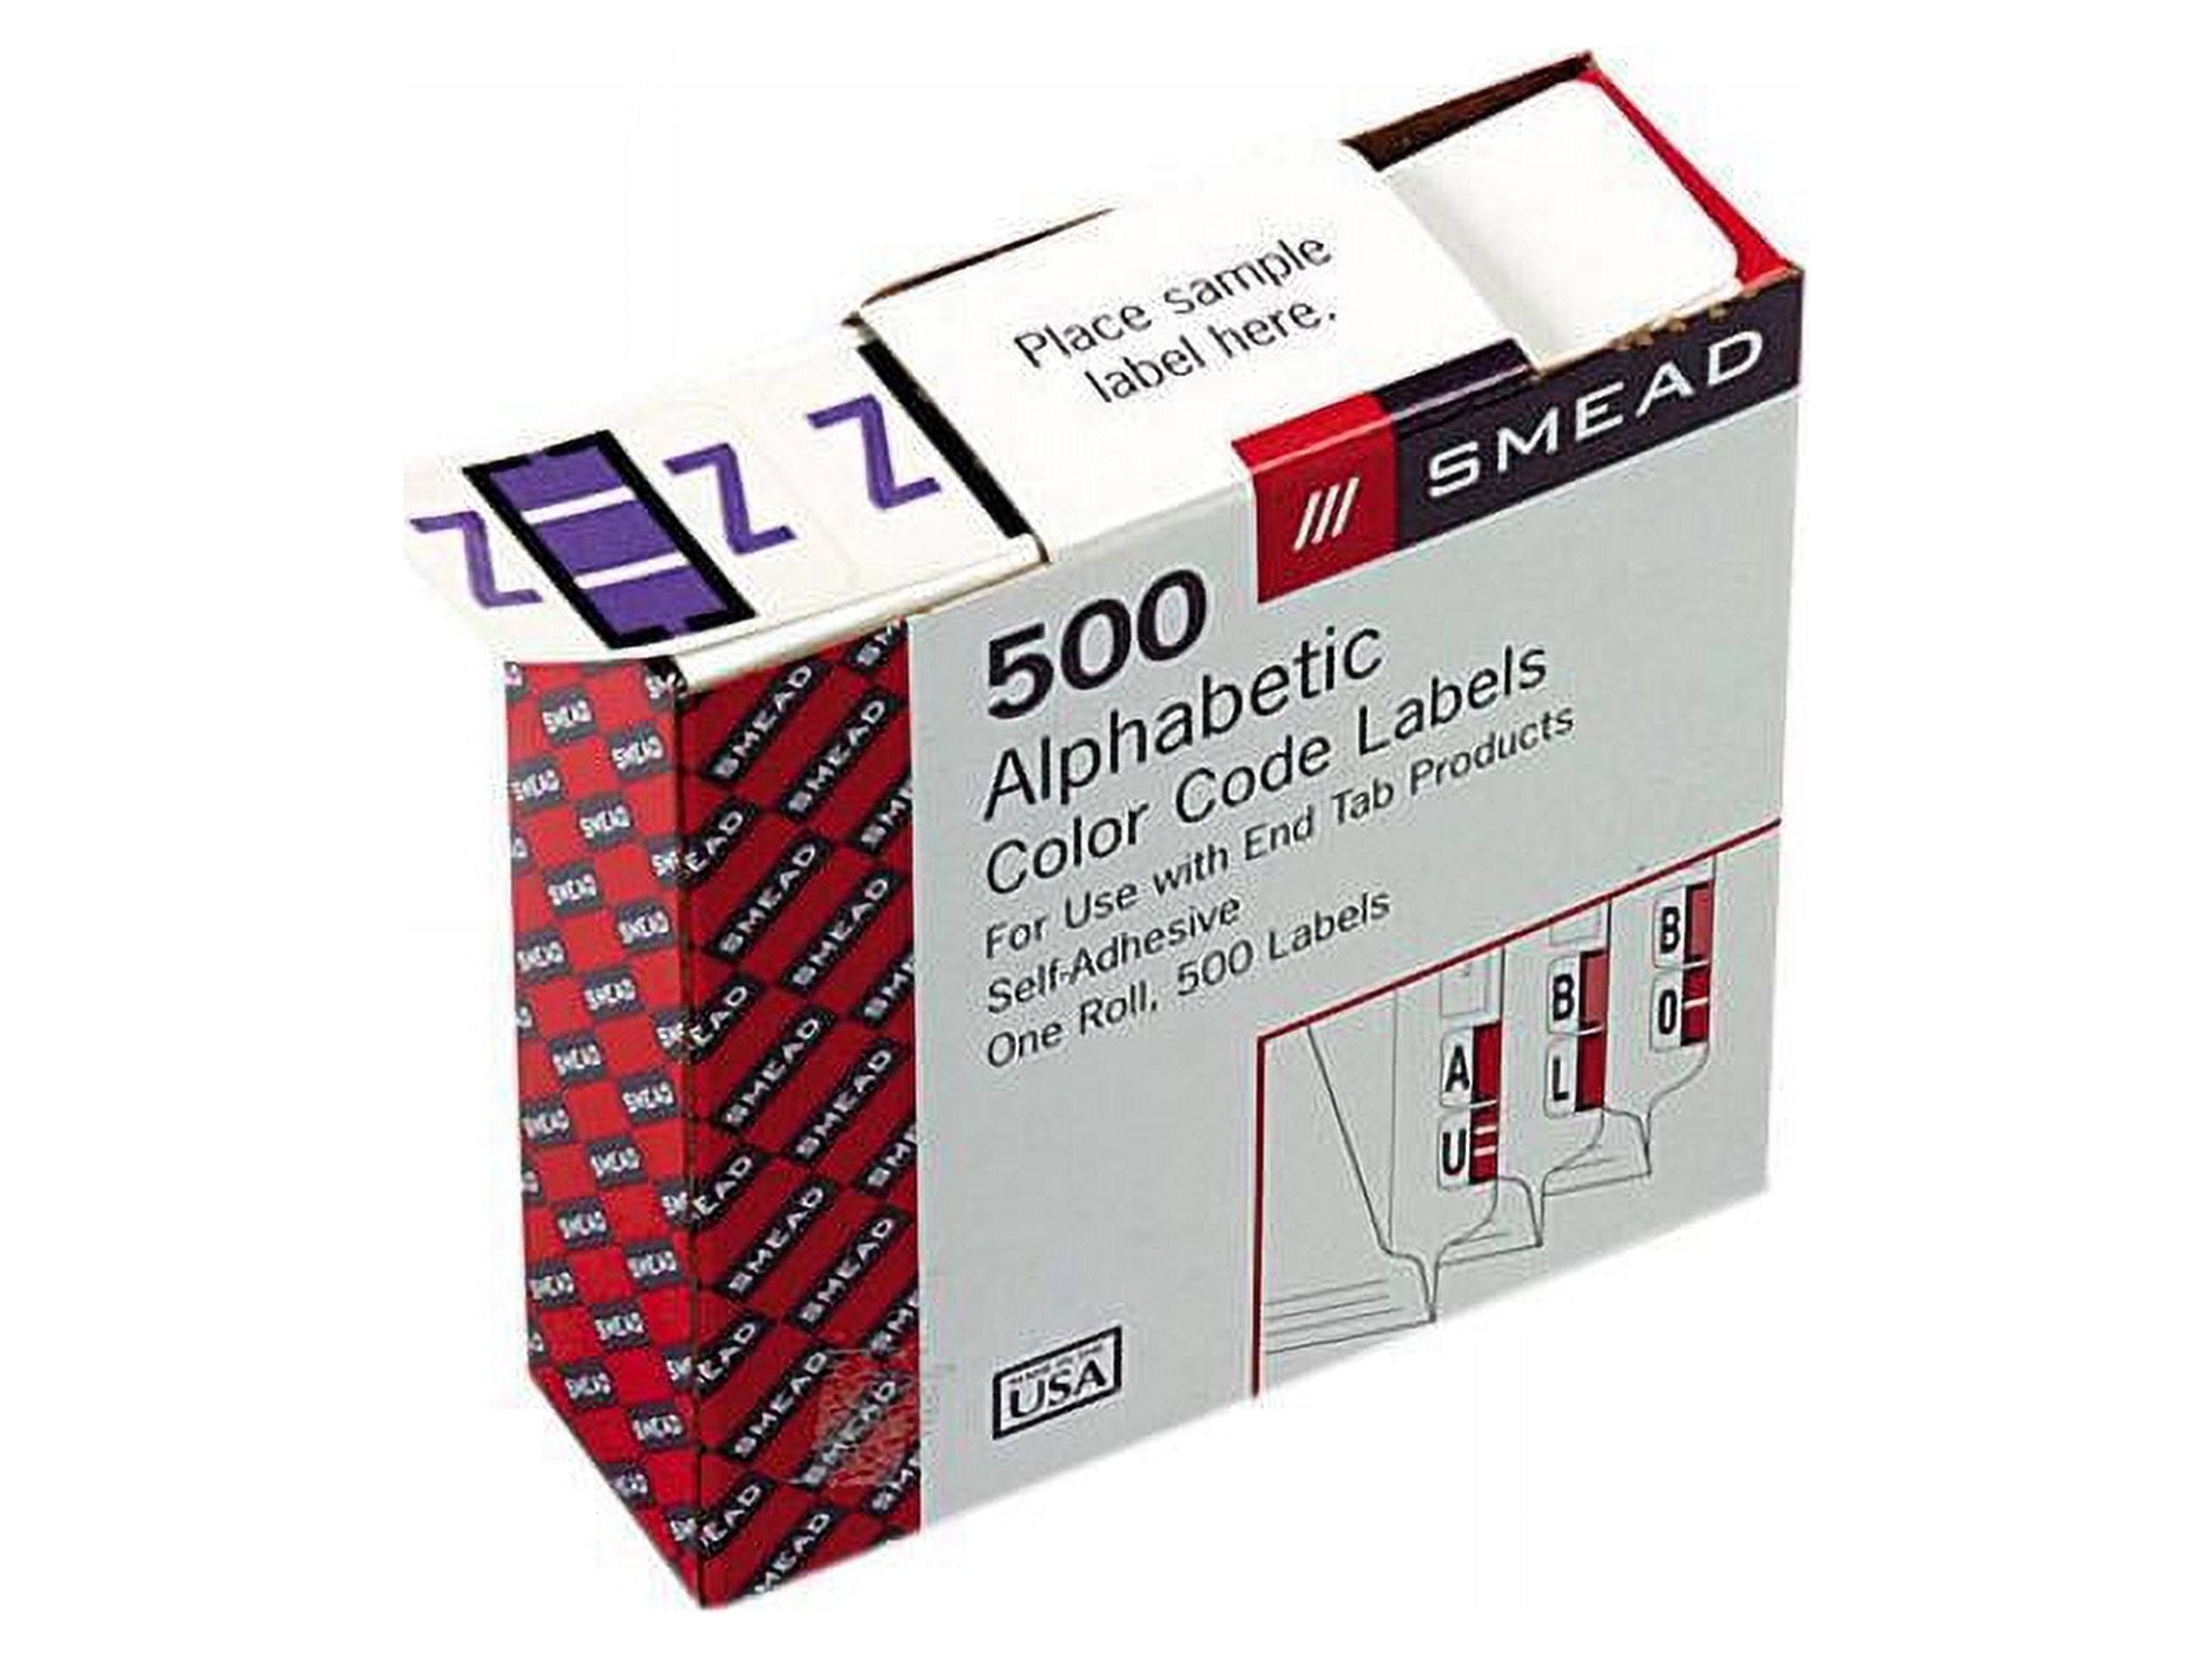 Smead 67096 A-Z Color-Coded Bar-Style End Tab Labels, Letter Z, Lavender, 500/Roll - image 1 of 3